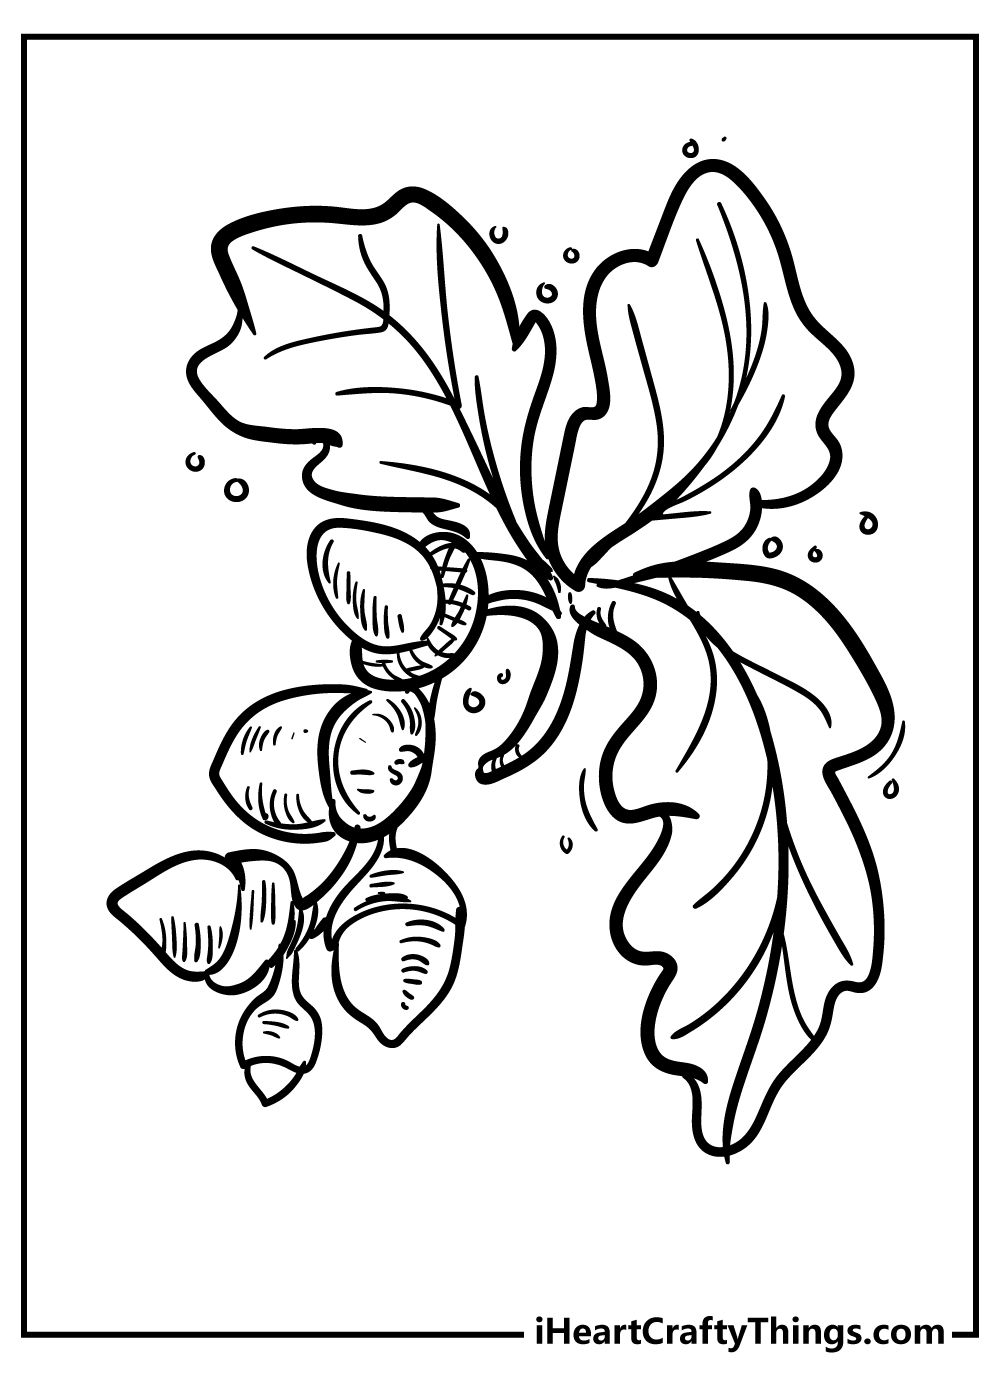 Acorn Coloring Book for adults free download